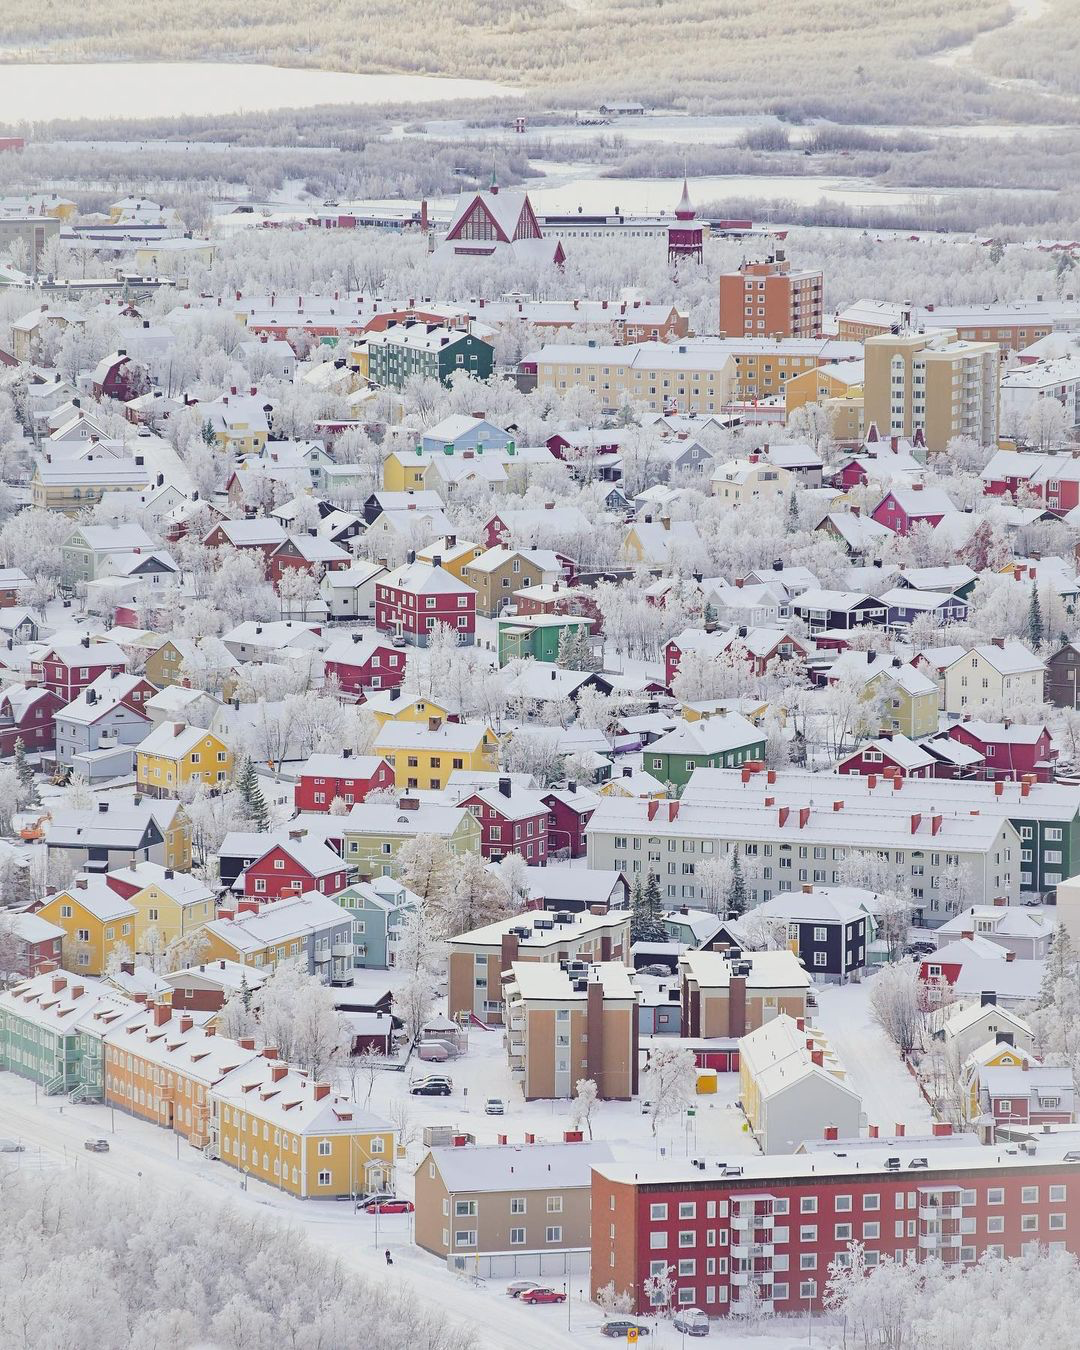 General 1080x1350 architecture building portrait display house cityscape winter snow Sweden town aerial view nature forest colorful city